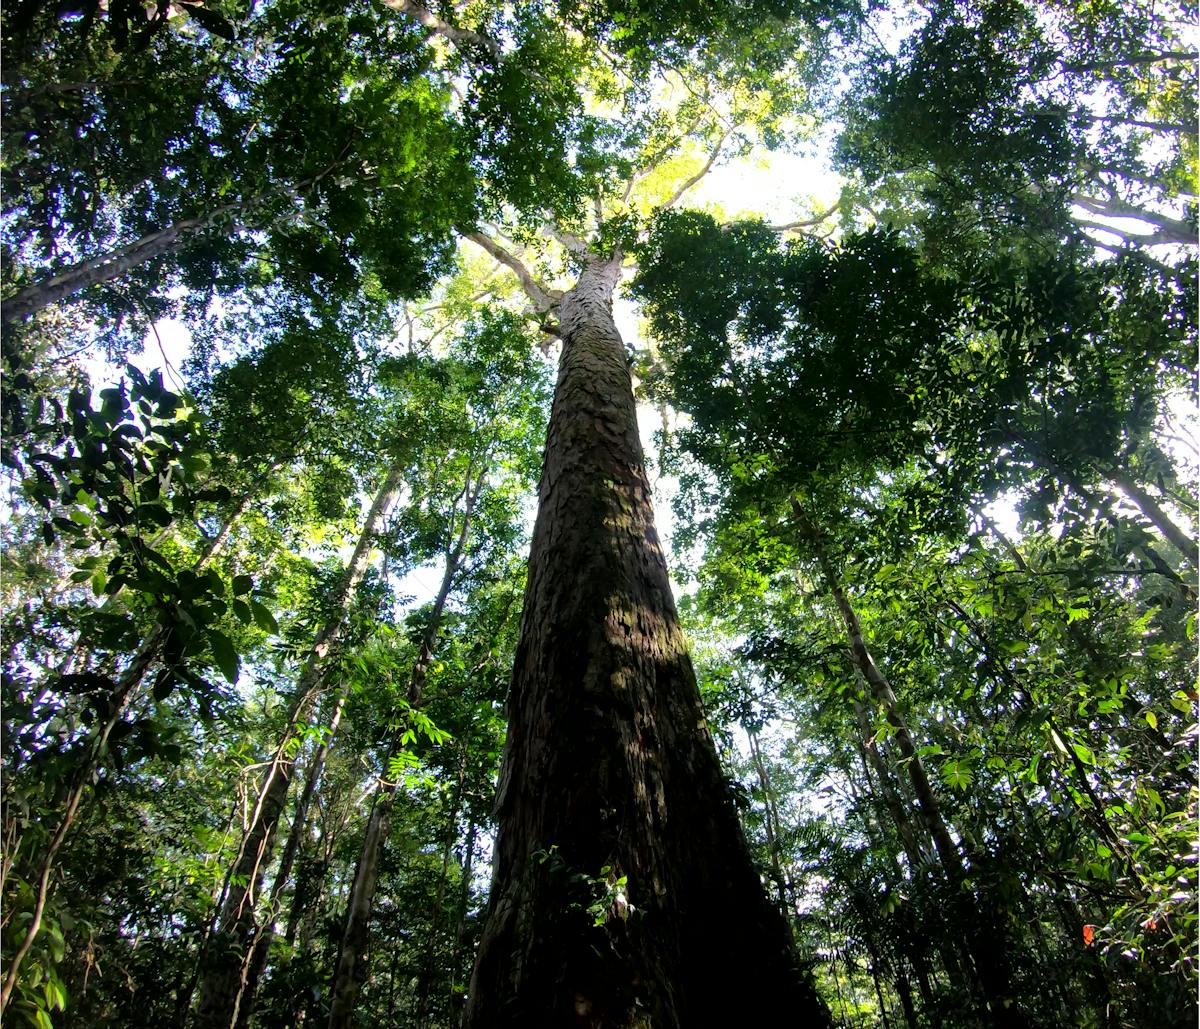 The Amazon S Tallest Tree Just Got 50 Taller And Scientists Don T Know How